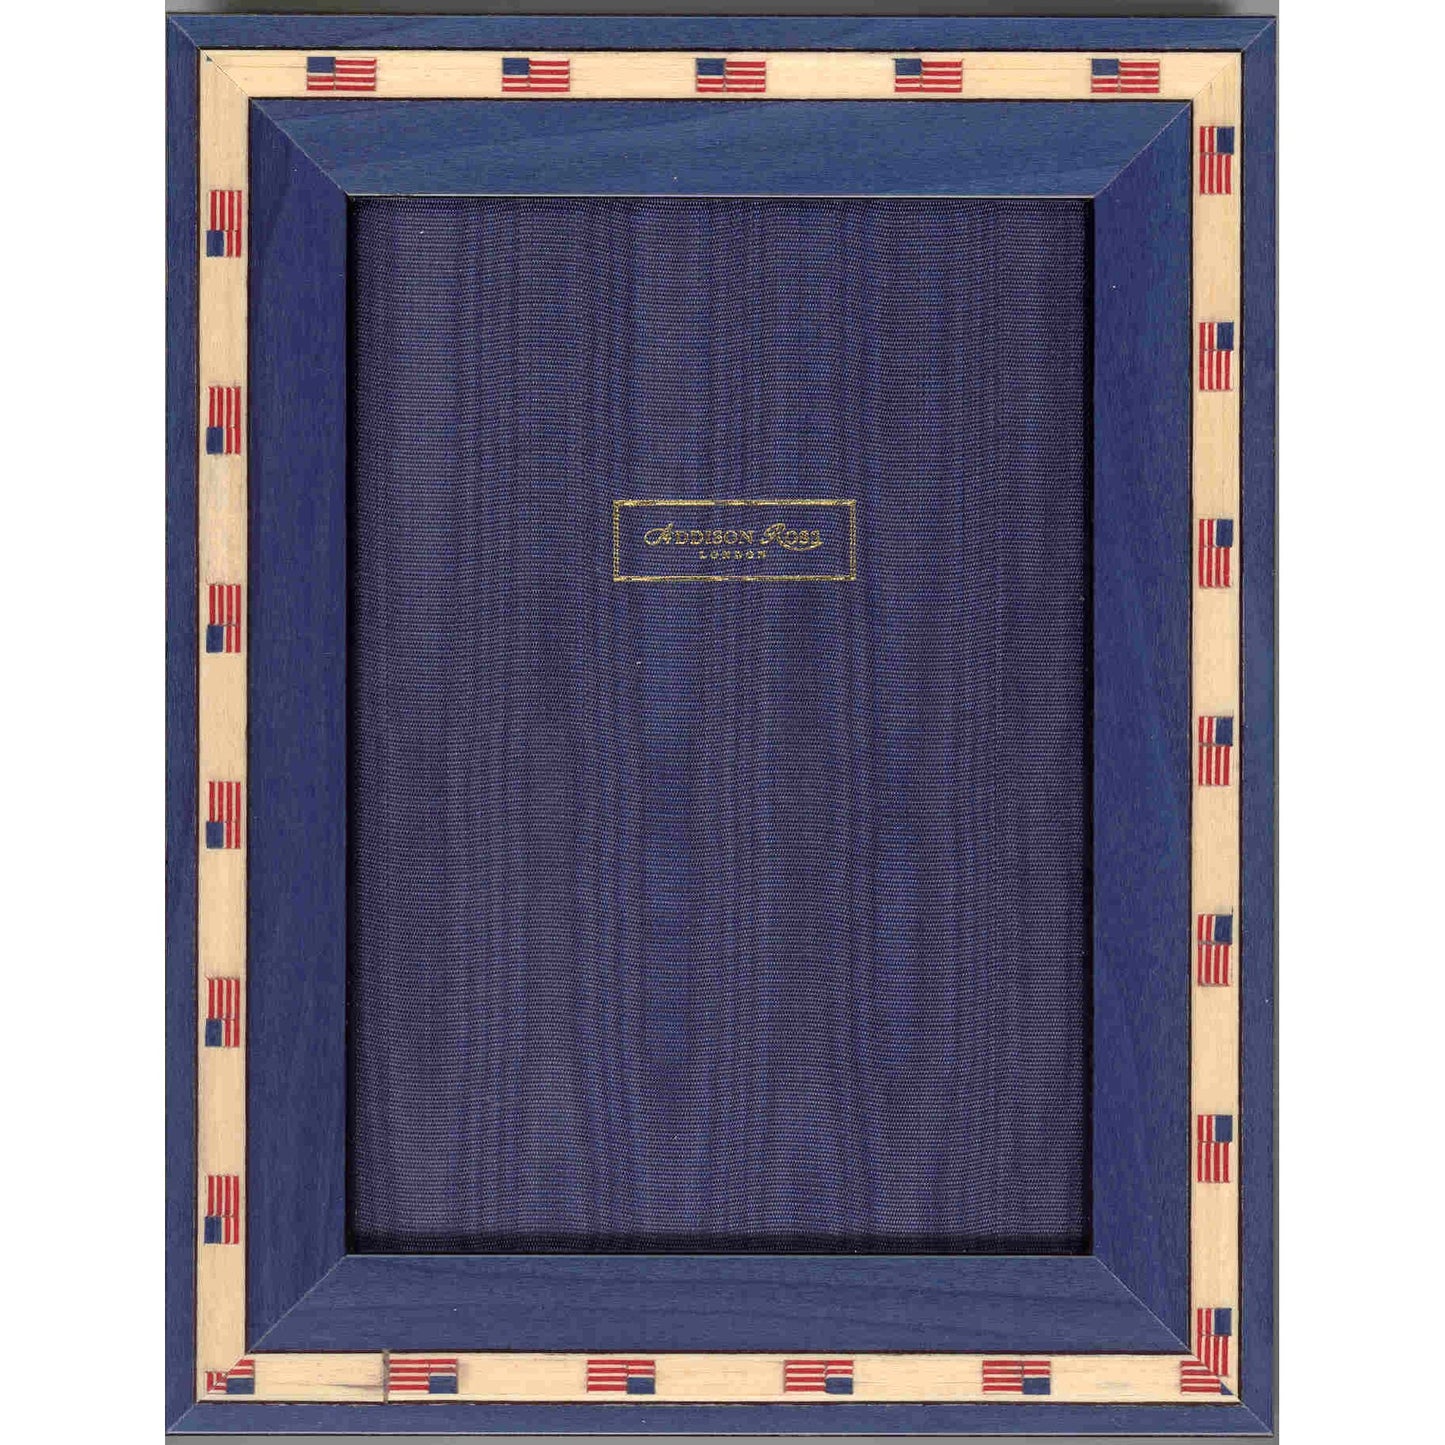 Addison Ross Stars and Stripes Marquetry Frame